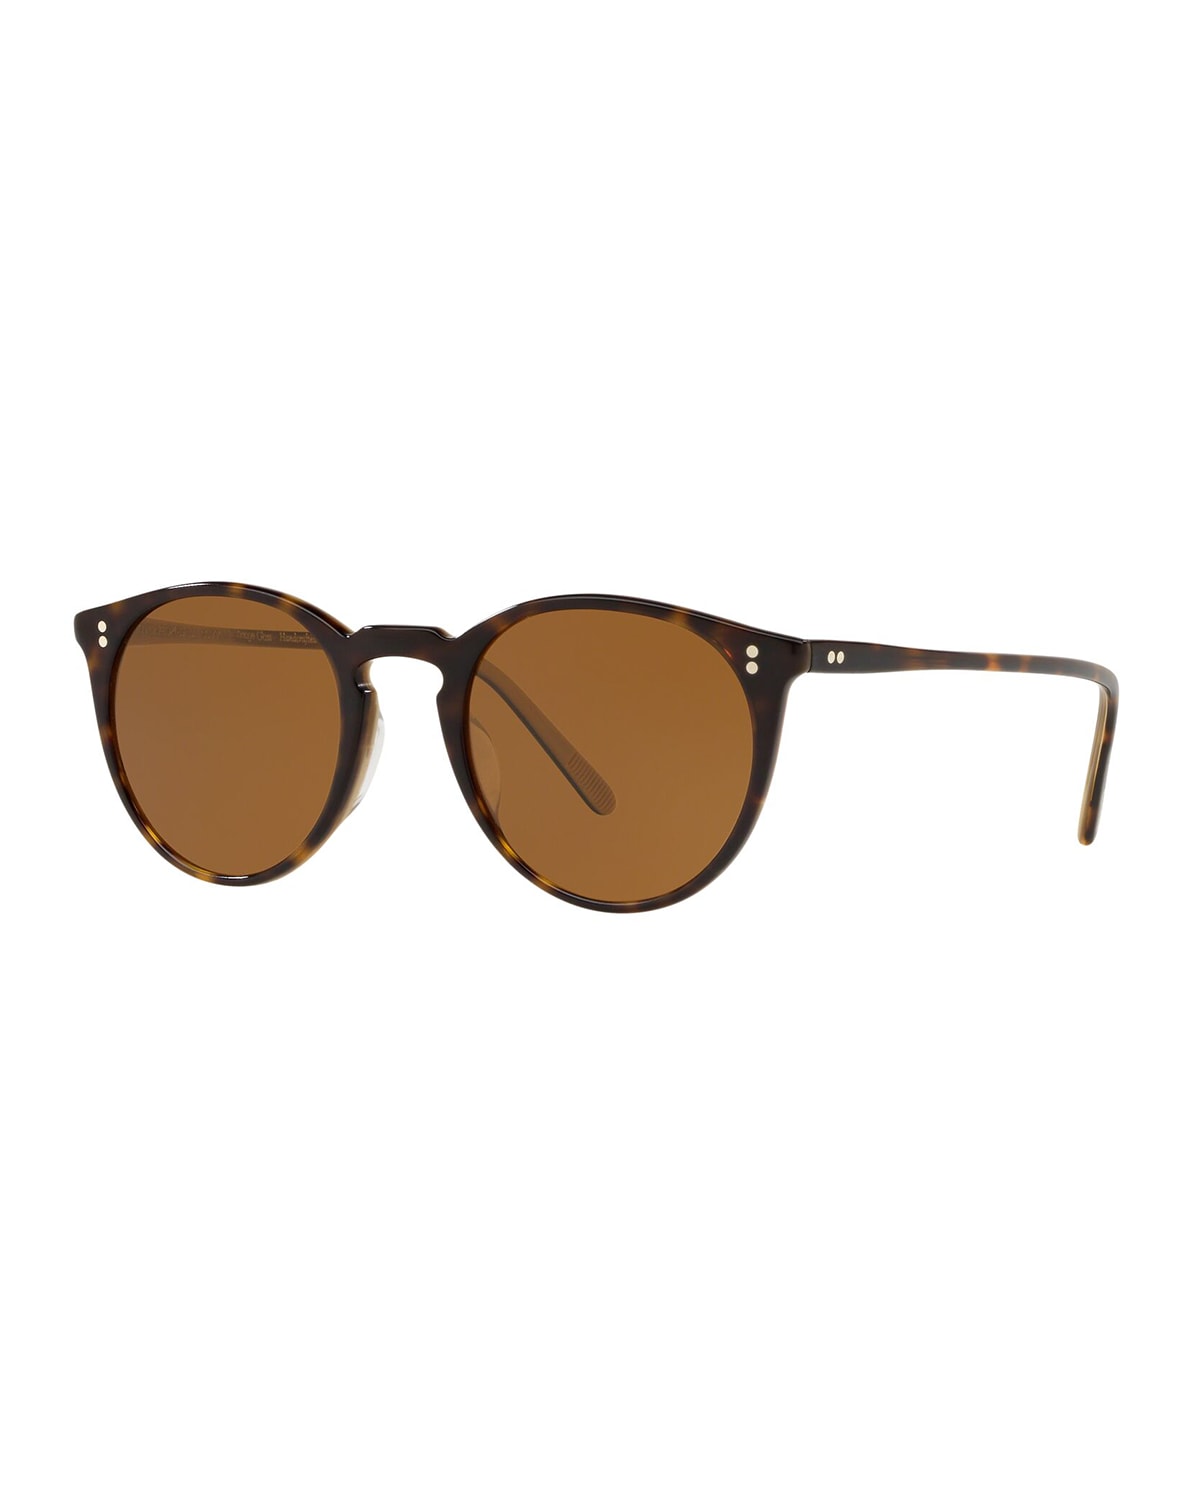 Oliver Peoples O'malley Round Acetate Sunglasses In Horn